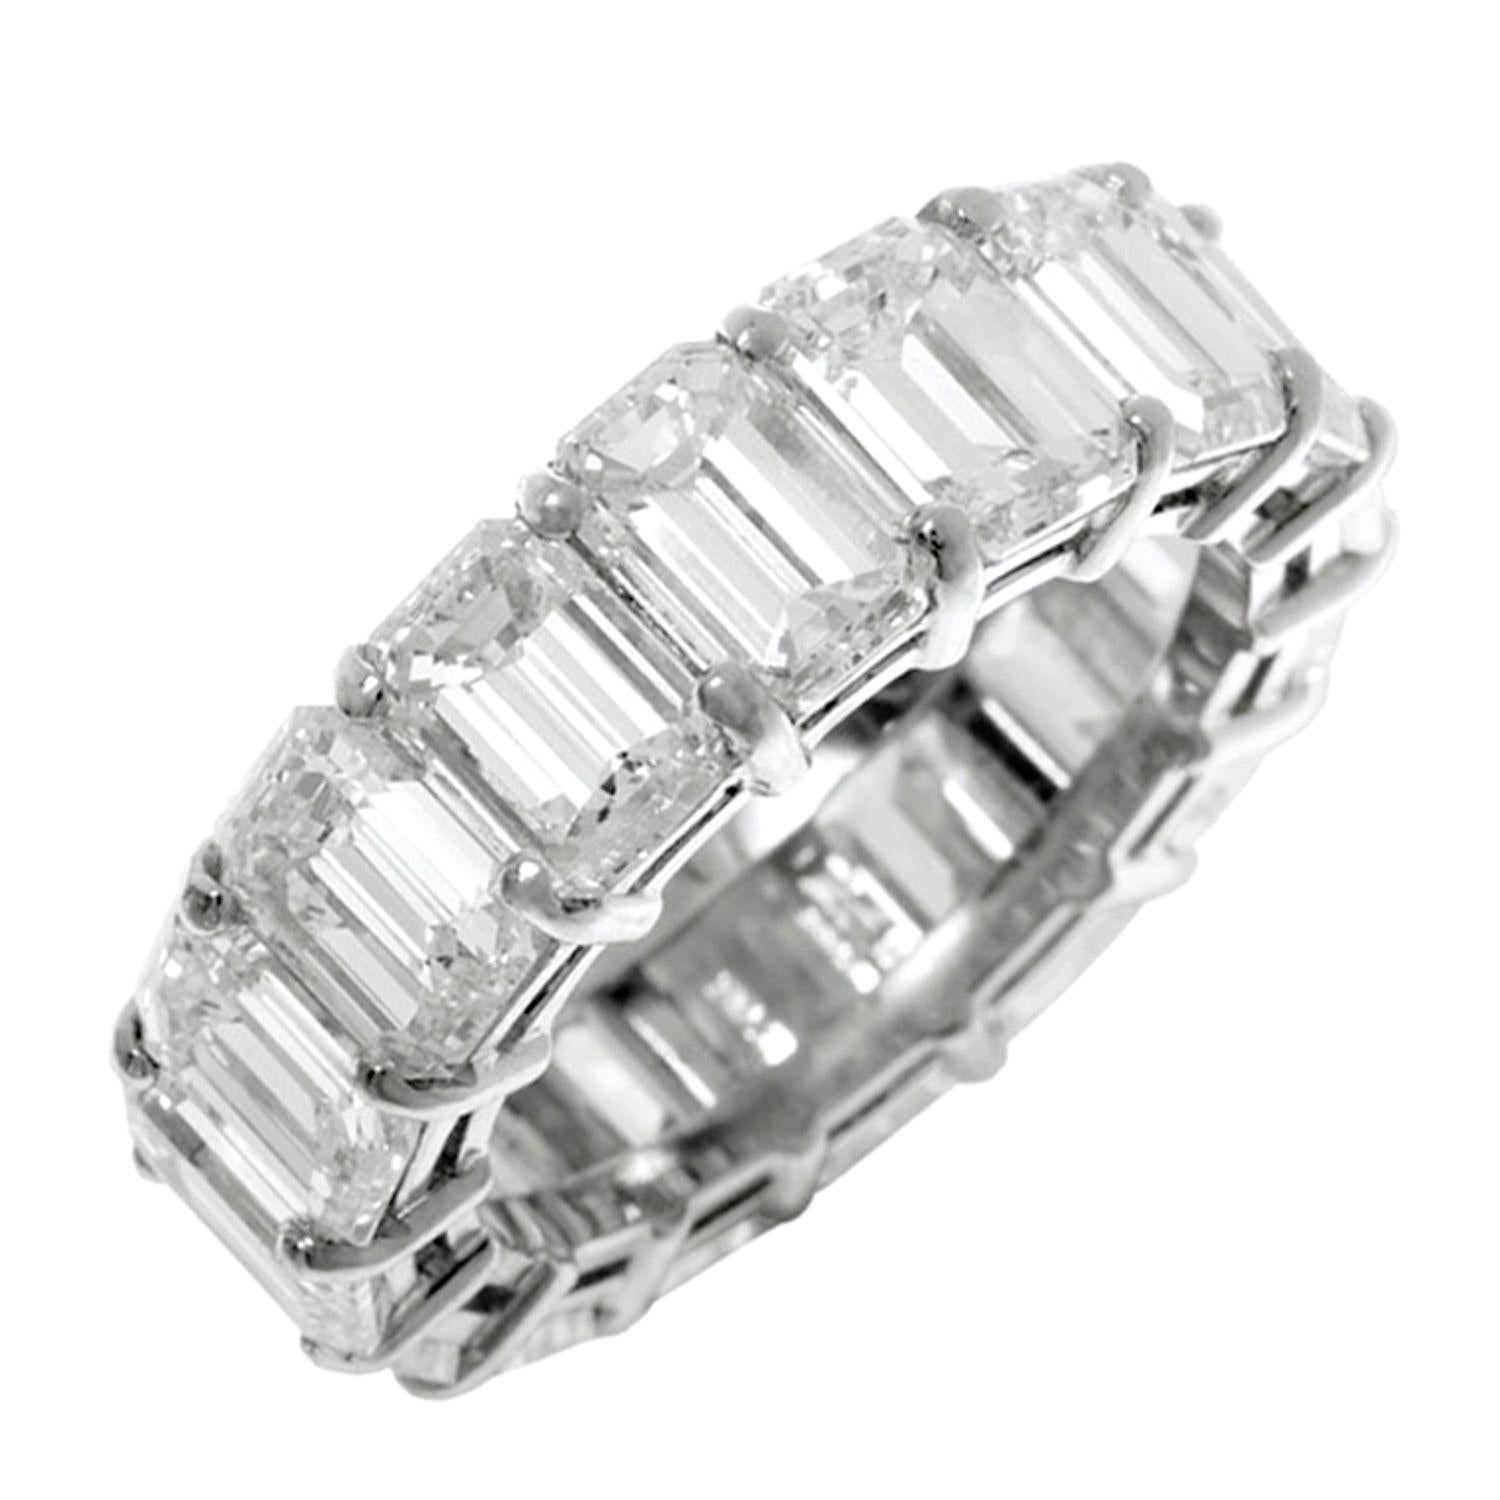 Platinum eternity (all the way around) emerald cut diamond band featuring 14 stones ALL GIA certified ranging from D,E,F in color and VVS, VS clarity- total weight is 14.15 carats.
